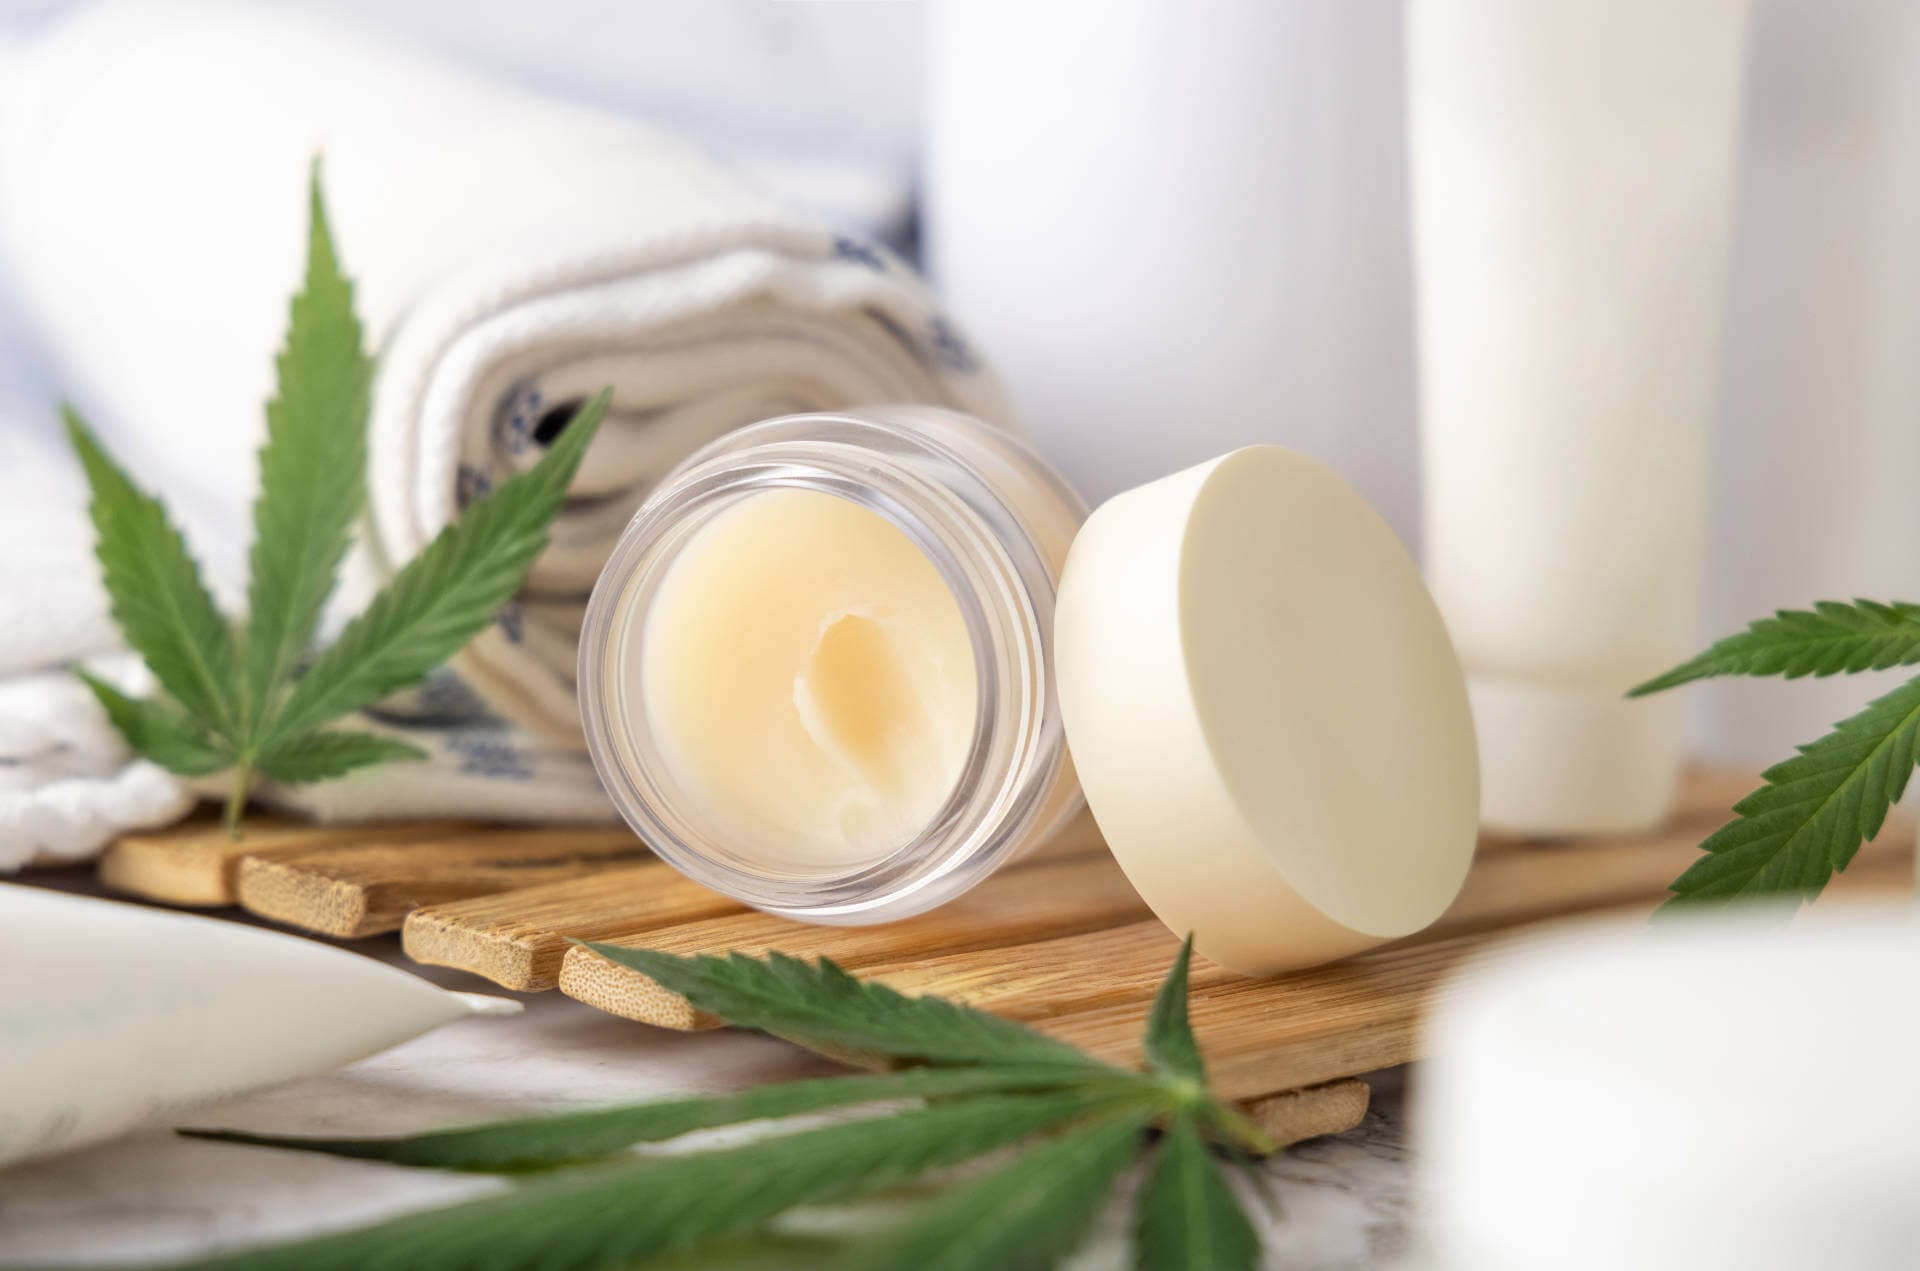 Jar with CBD lip balm and green cannabis leaves near bottles and towel in bathroom close up on a wooden tray. Organic skincare product. Alternative cosmetics